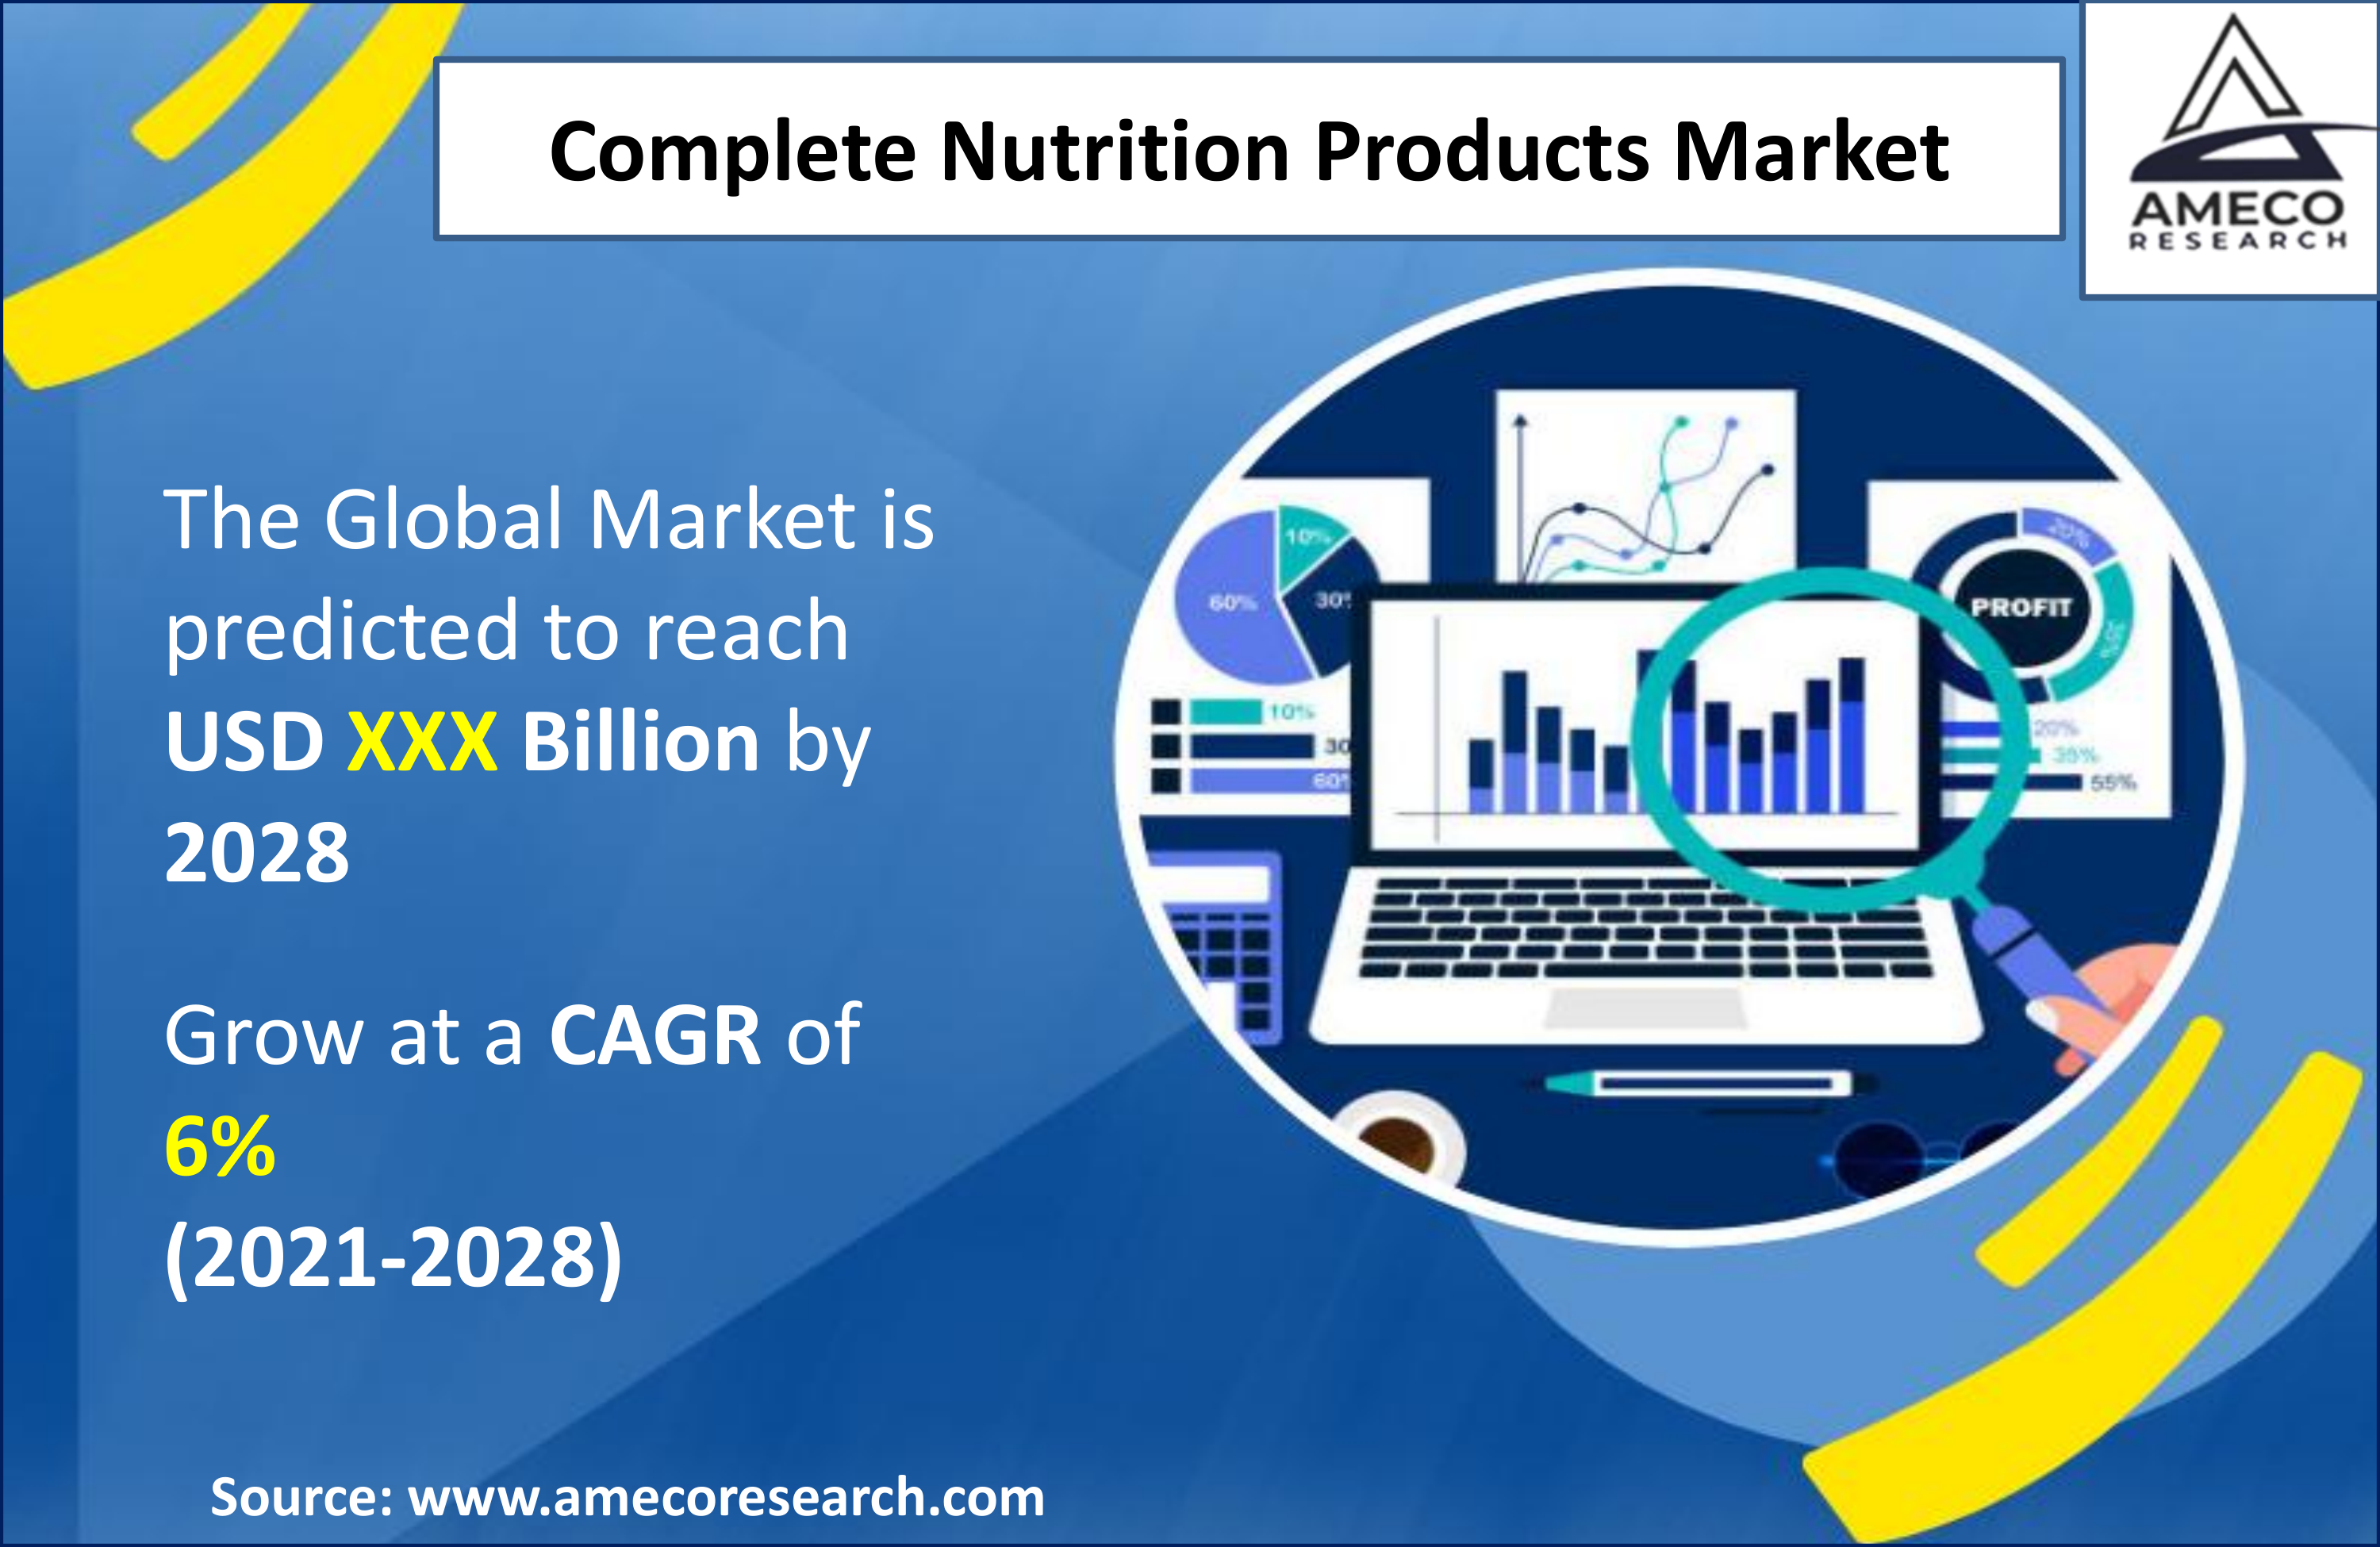 Complete Nutrition Products Market